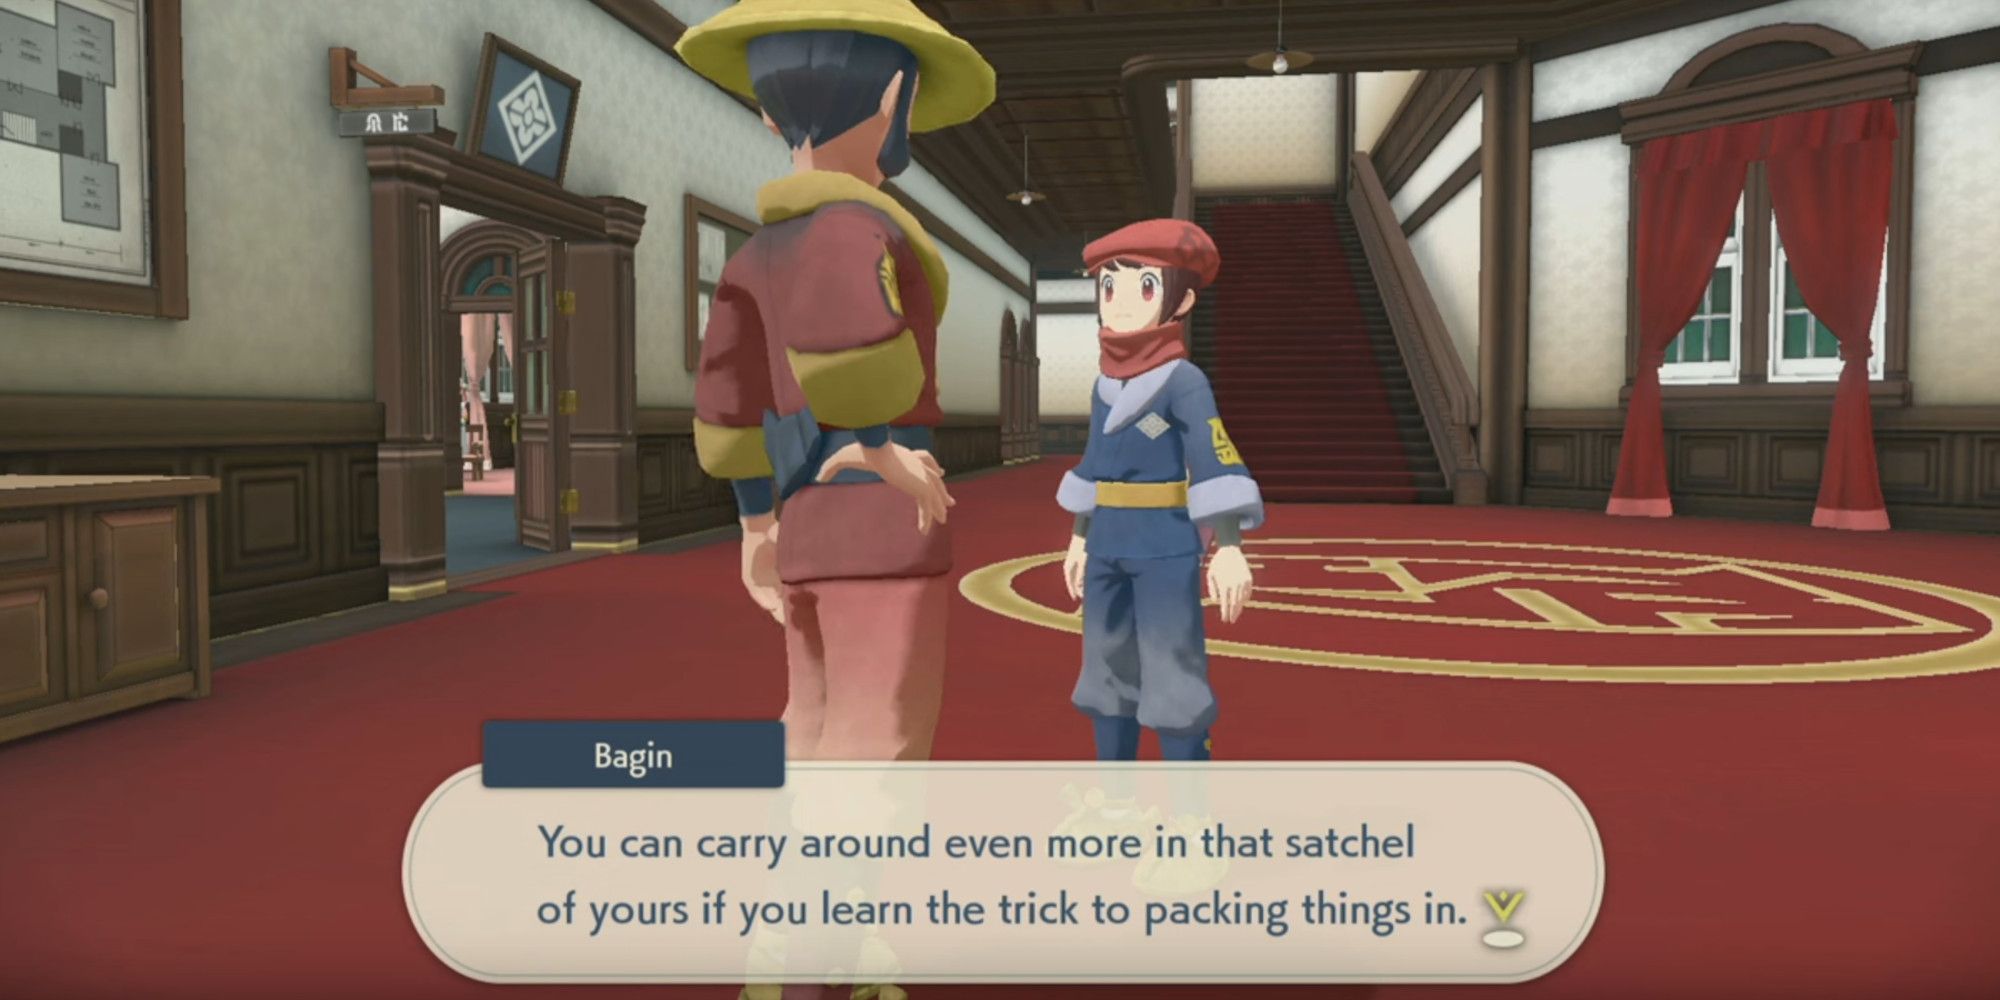 Bagin from Pokemon Legends Arceus saying "You can carry around even more in that satchel of yours if you learn the trick to packing things in." Both him and the player are standing in the Galaxy Team Headquarters.